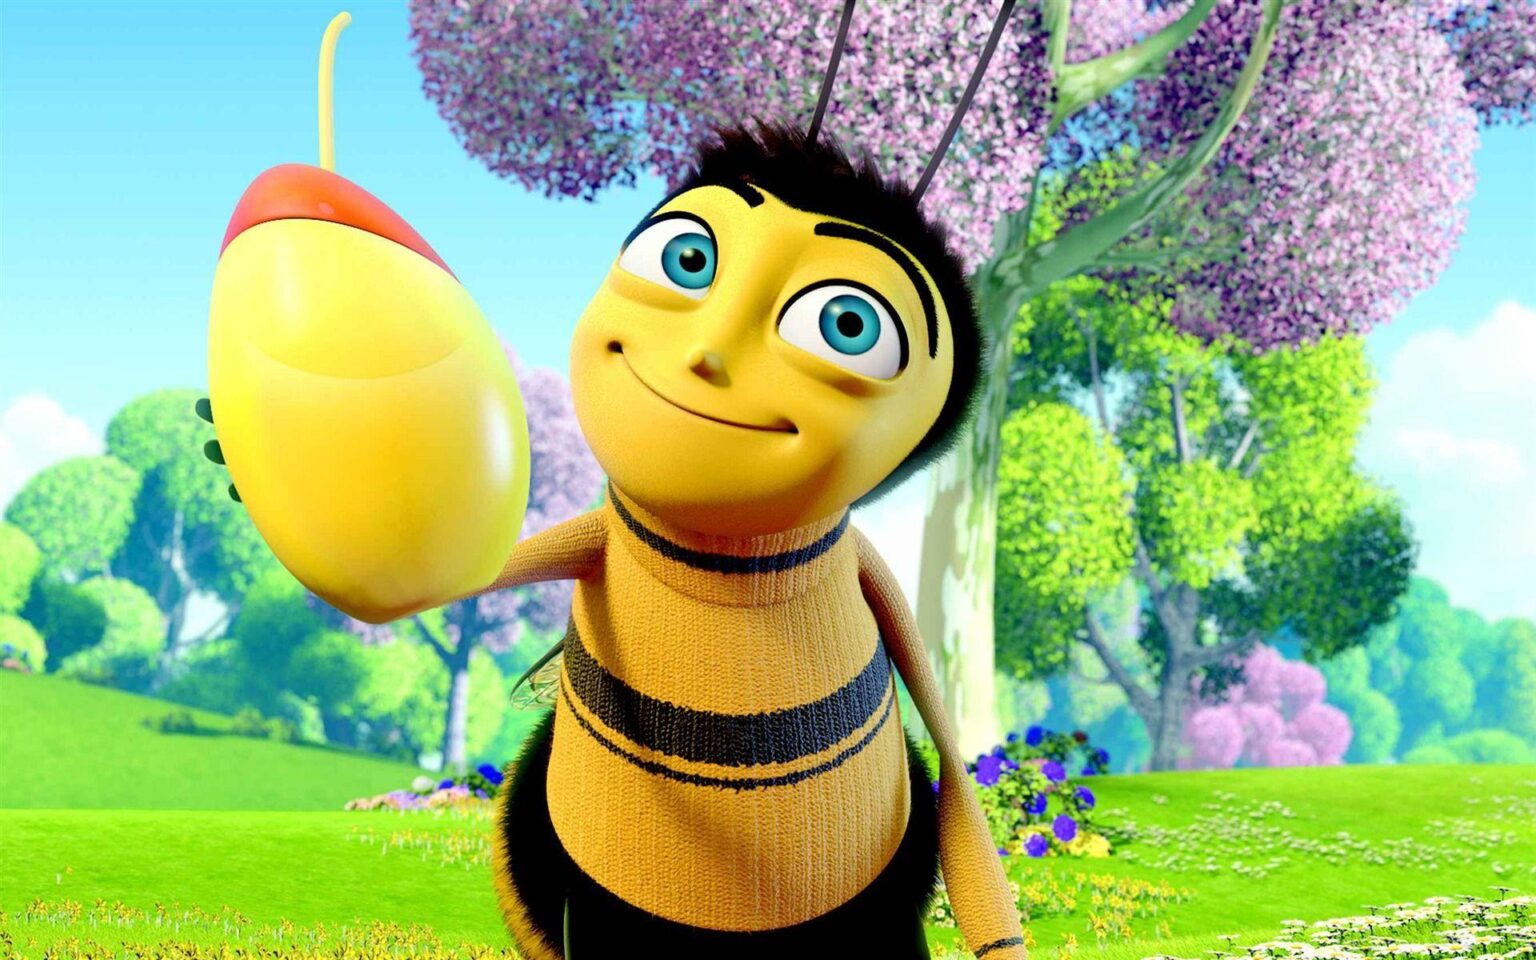 Today is National Bee Day! How are we choosing to celebrate our favorite pollinators? With some 'Bee Movie' memes, of course! Thanks, Jerry.